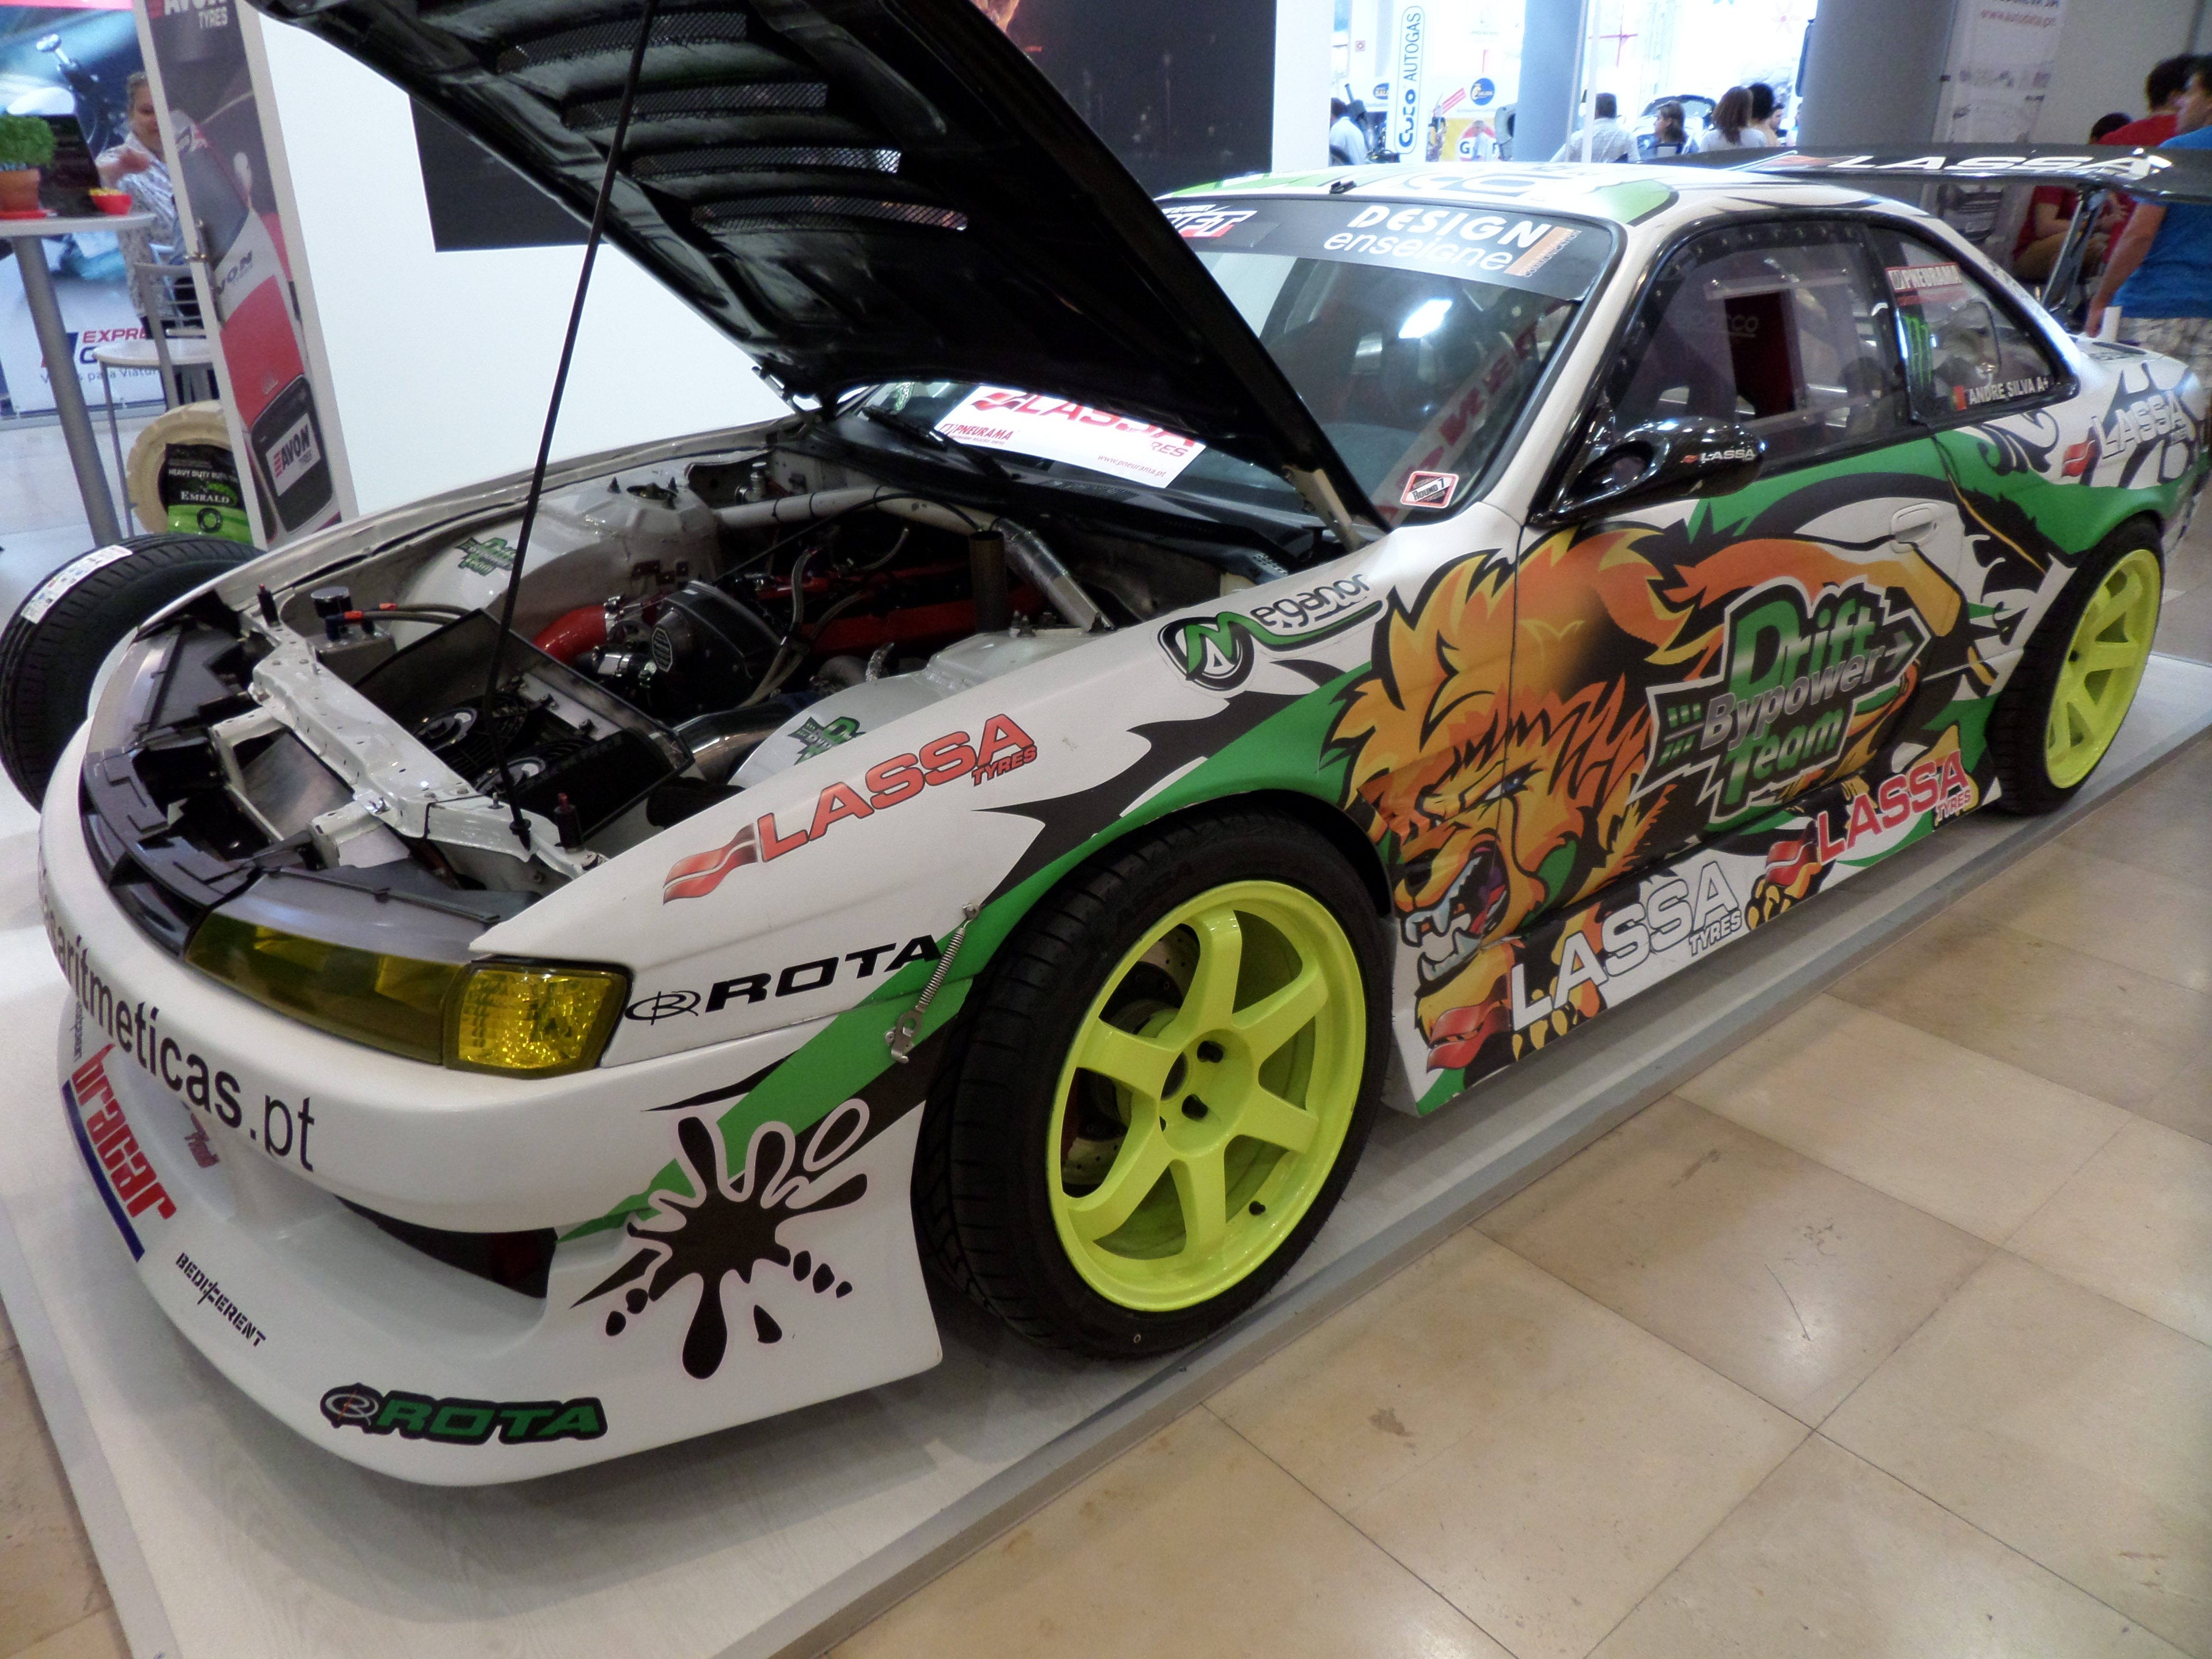 Nissan 240SX Drift Car: Yes, we have those in Portugal too.